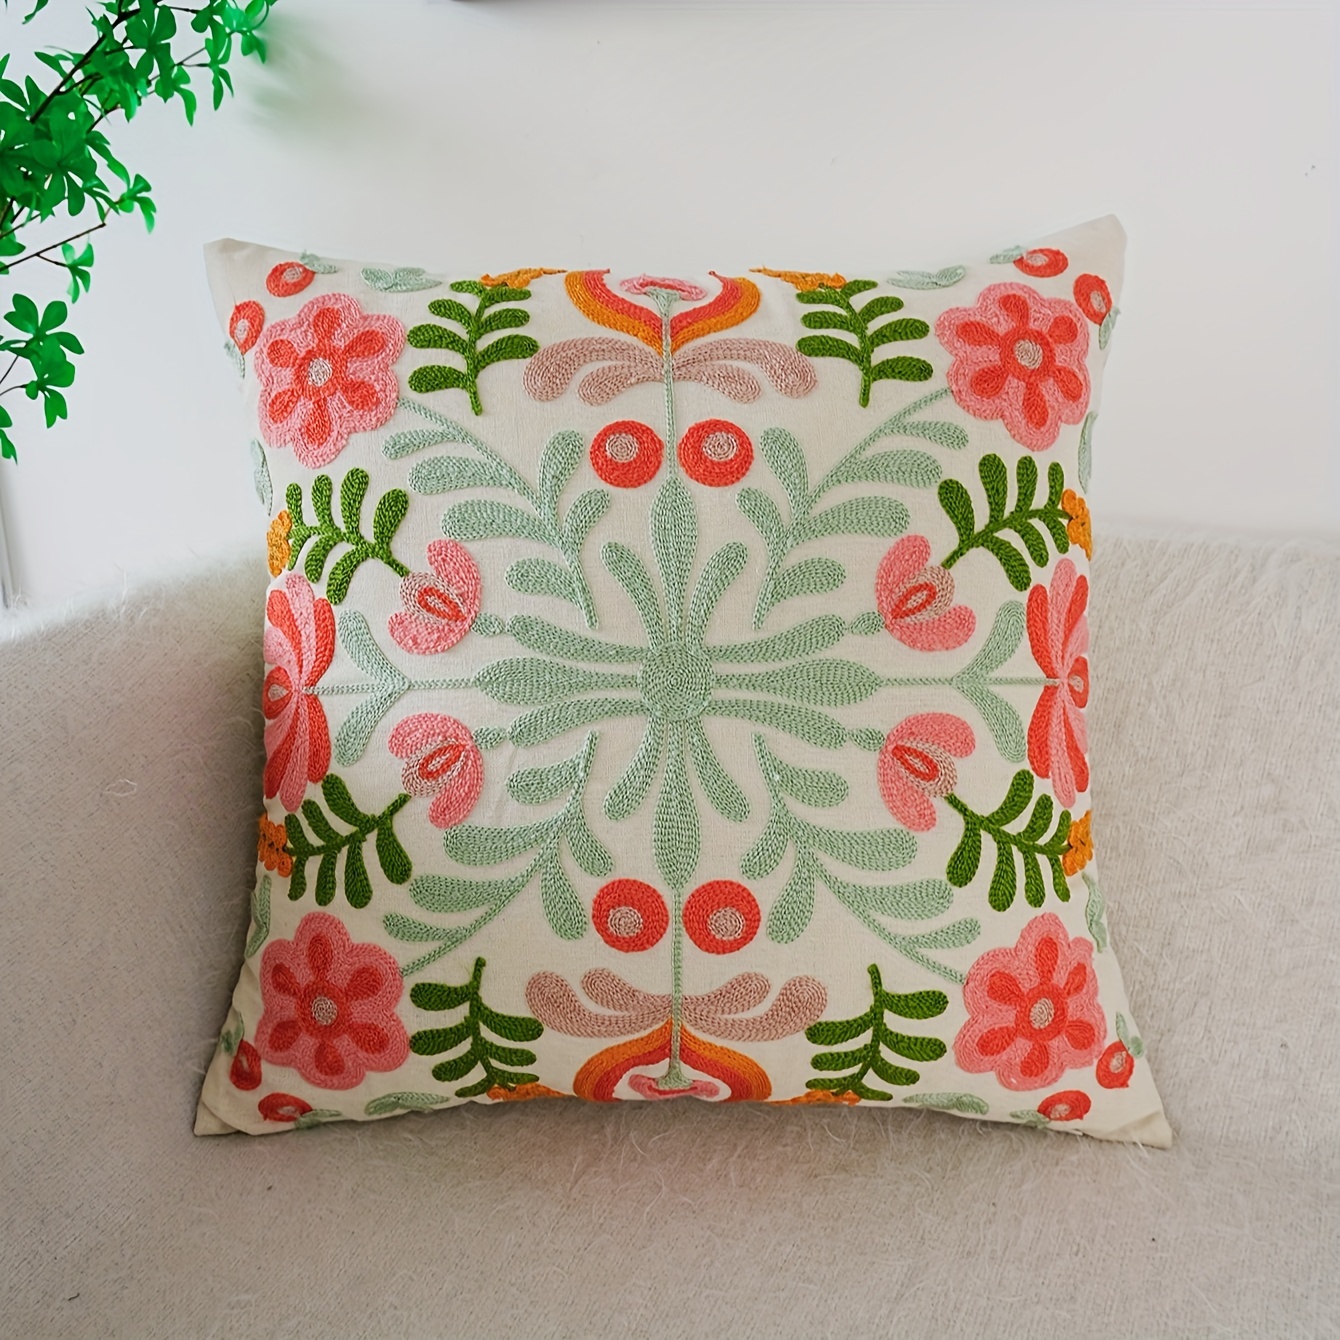 

Handcrafted Bohemian Style Throw Pillow Cover With Floral Embroidery - No Insert Included - Machine Washable - Zipper Closure - Suitable For Various Room Types - Made With Polyester Fabric